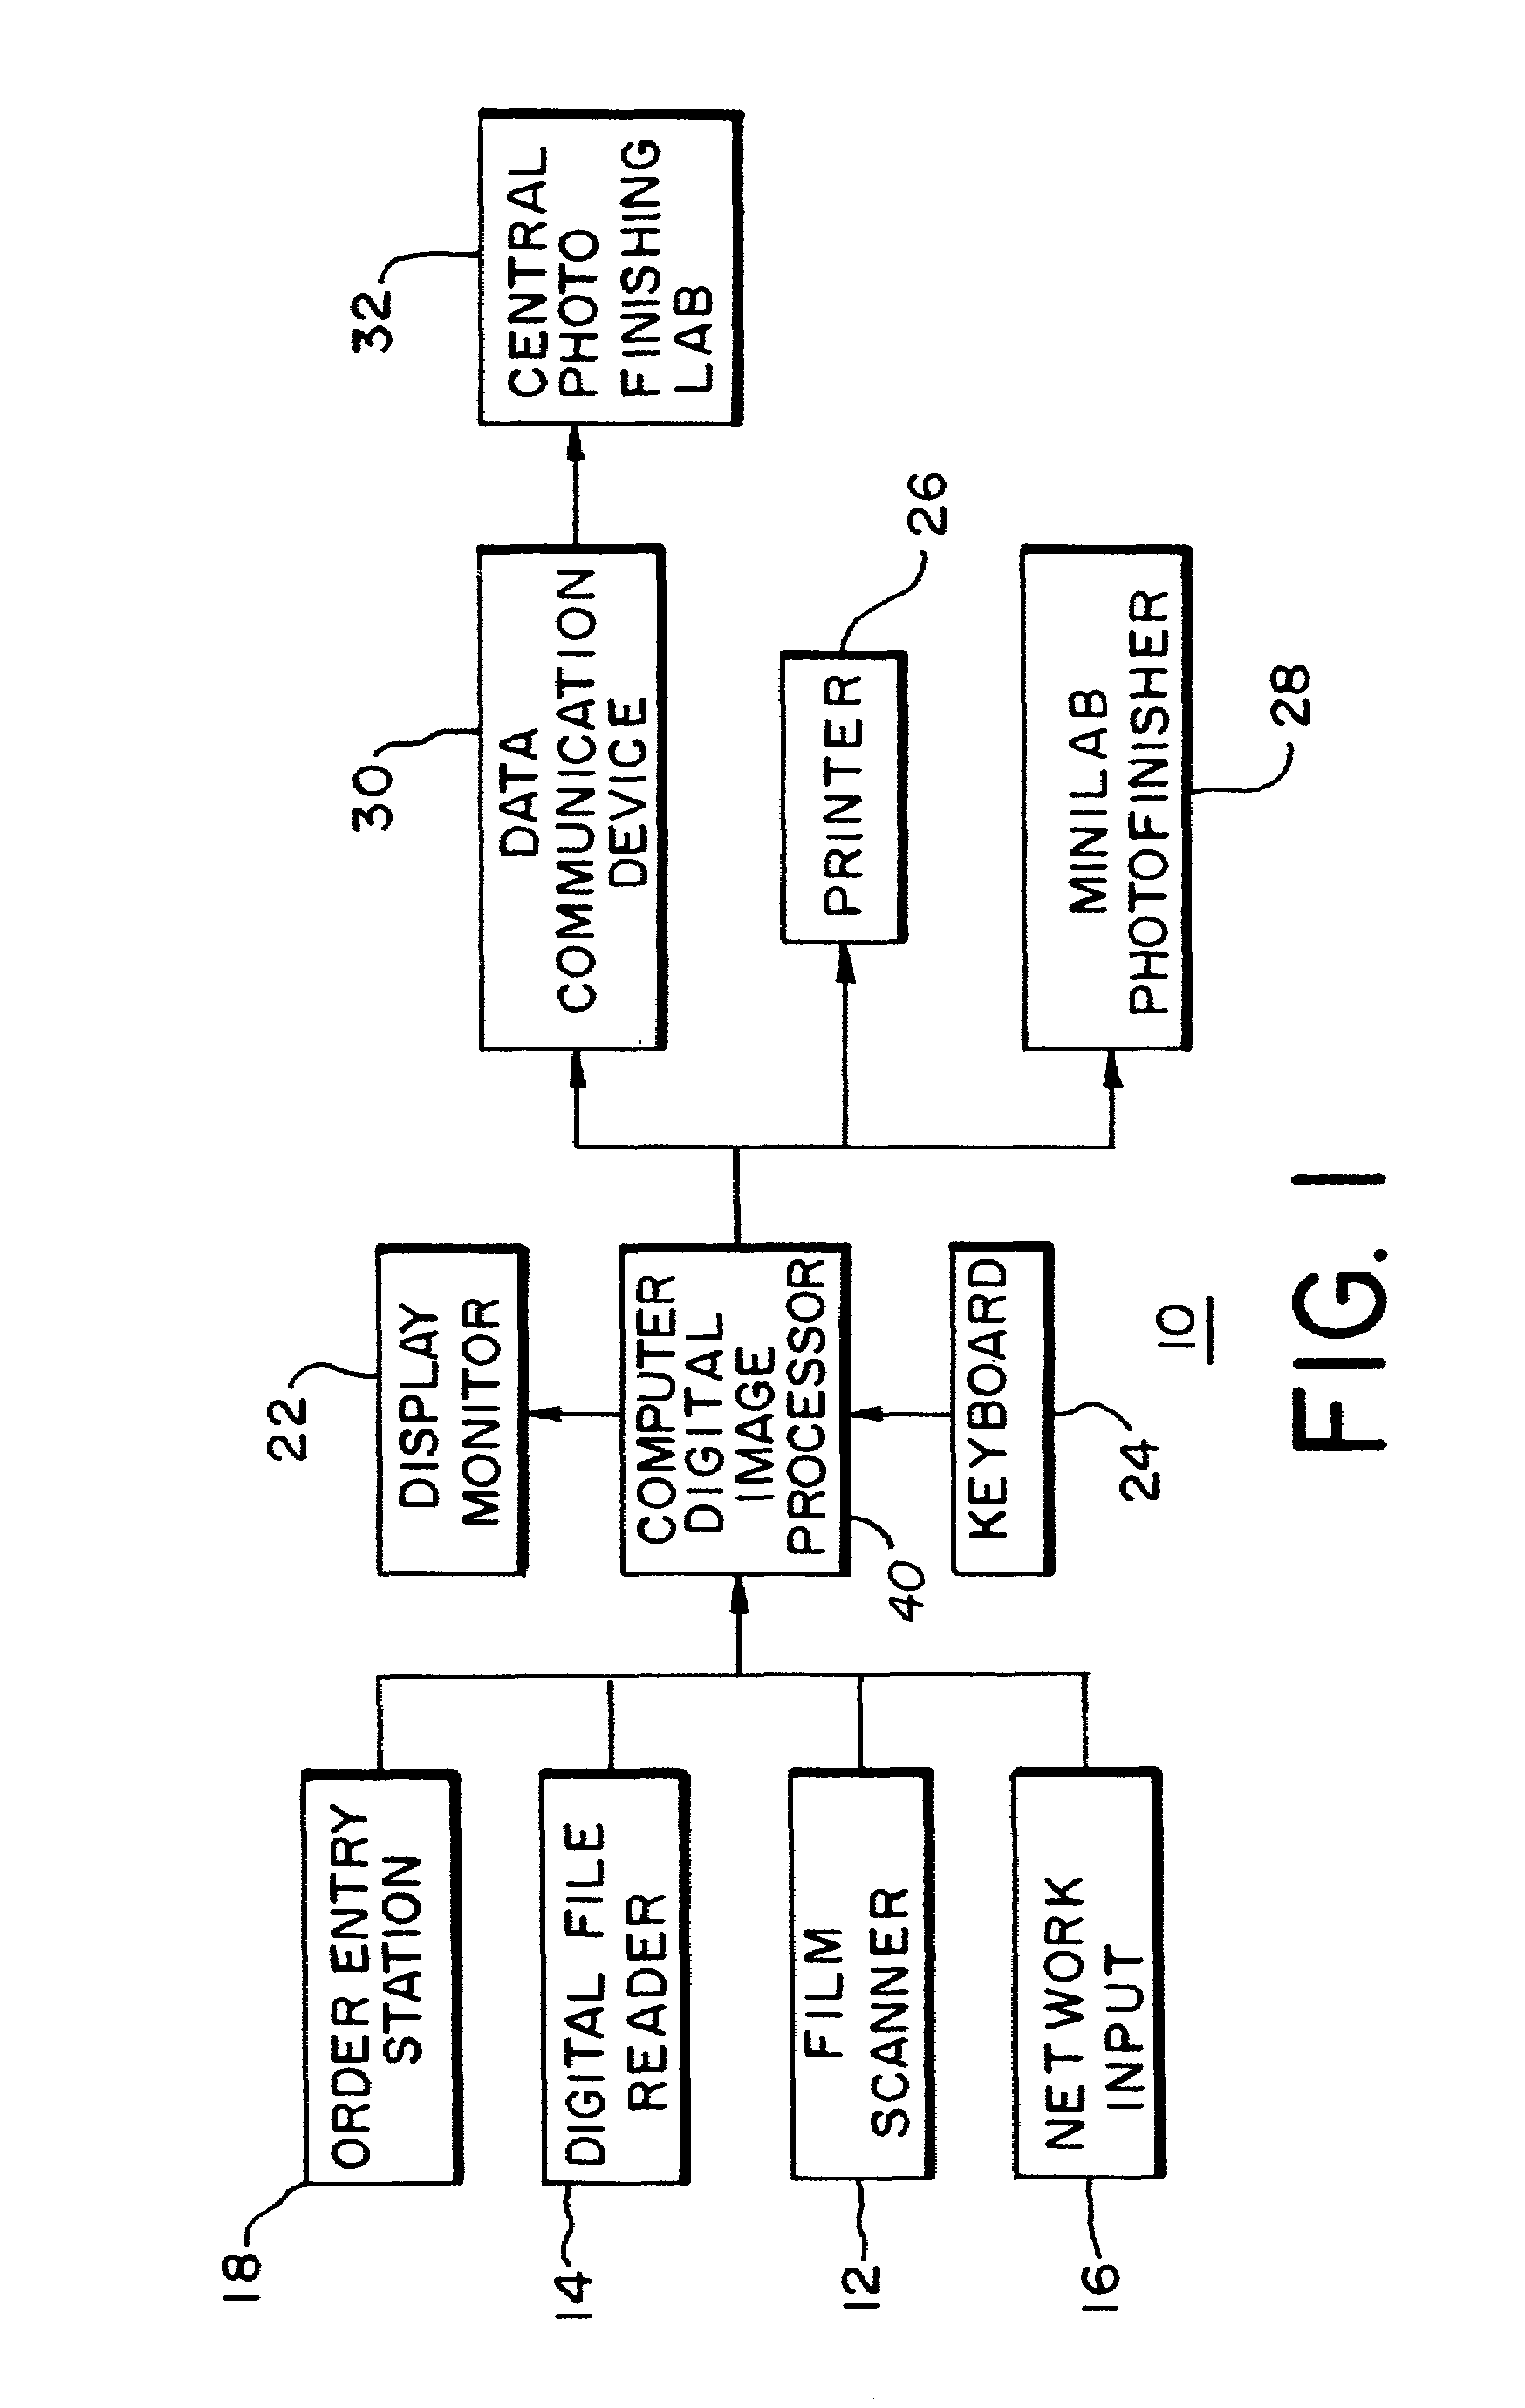 System and method for deciding when to correct image-specific defects based on camera, scene, display and demographic data